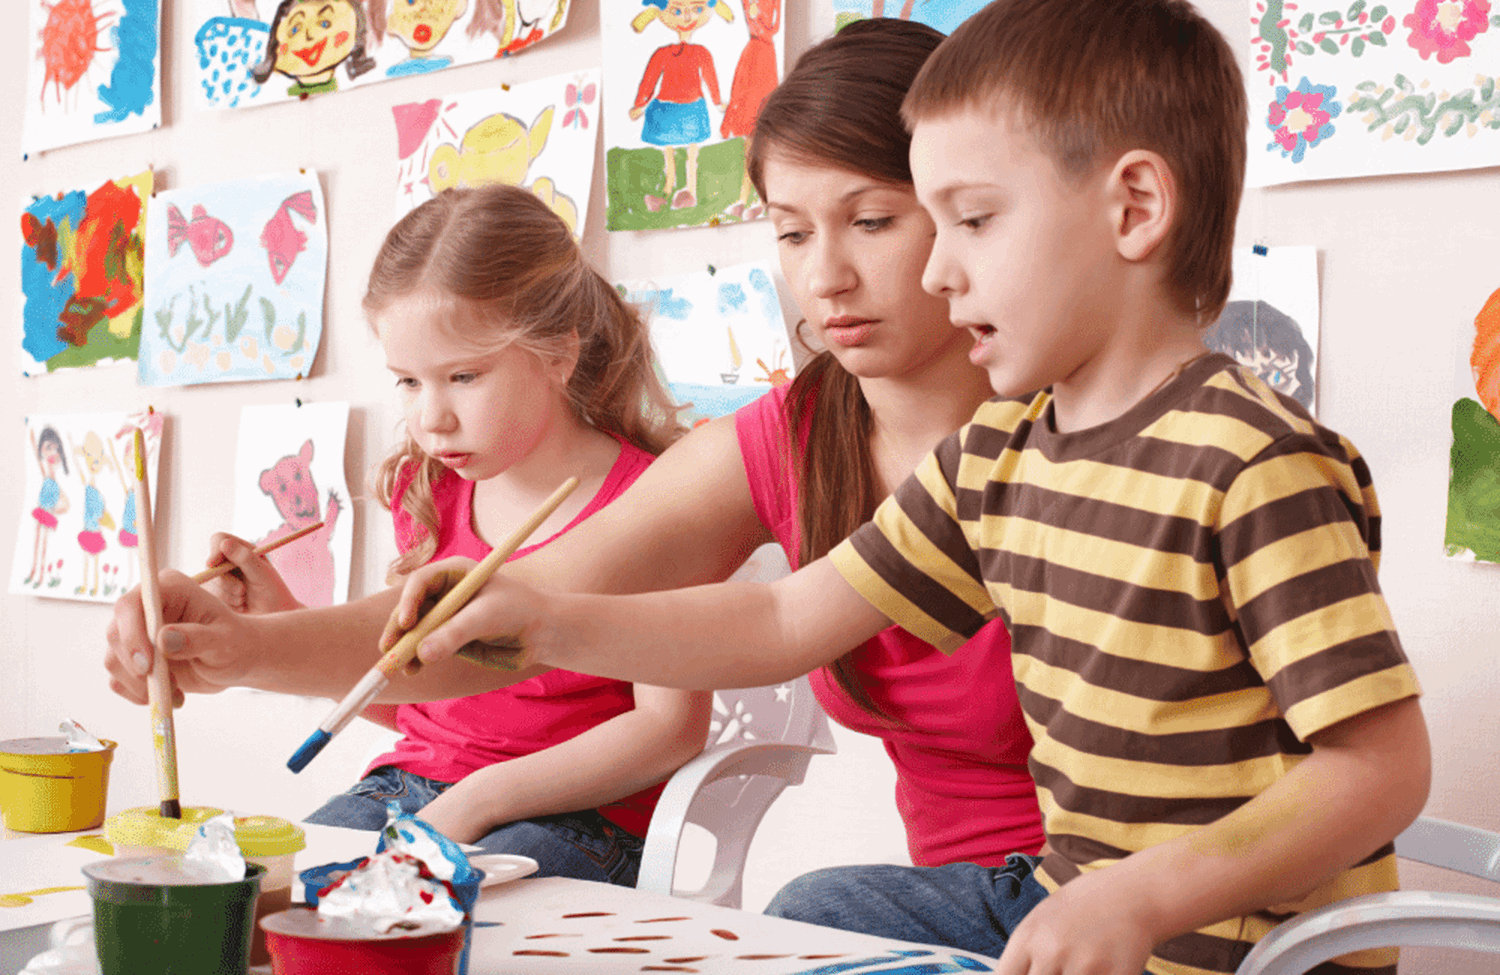 Children and adult painting together